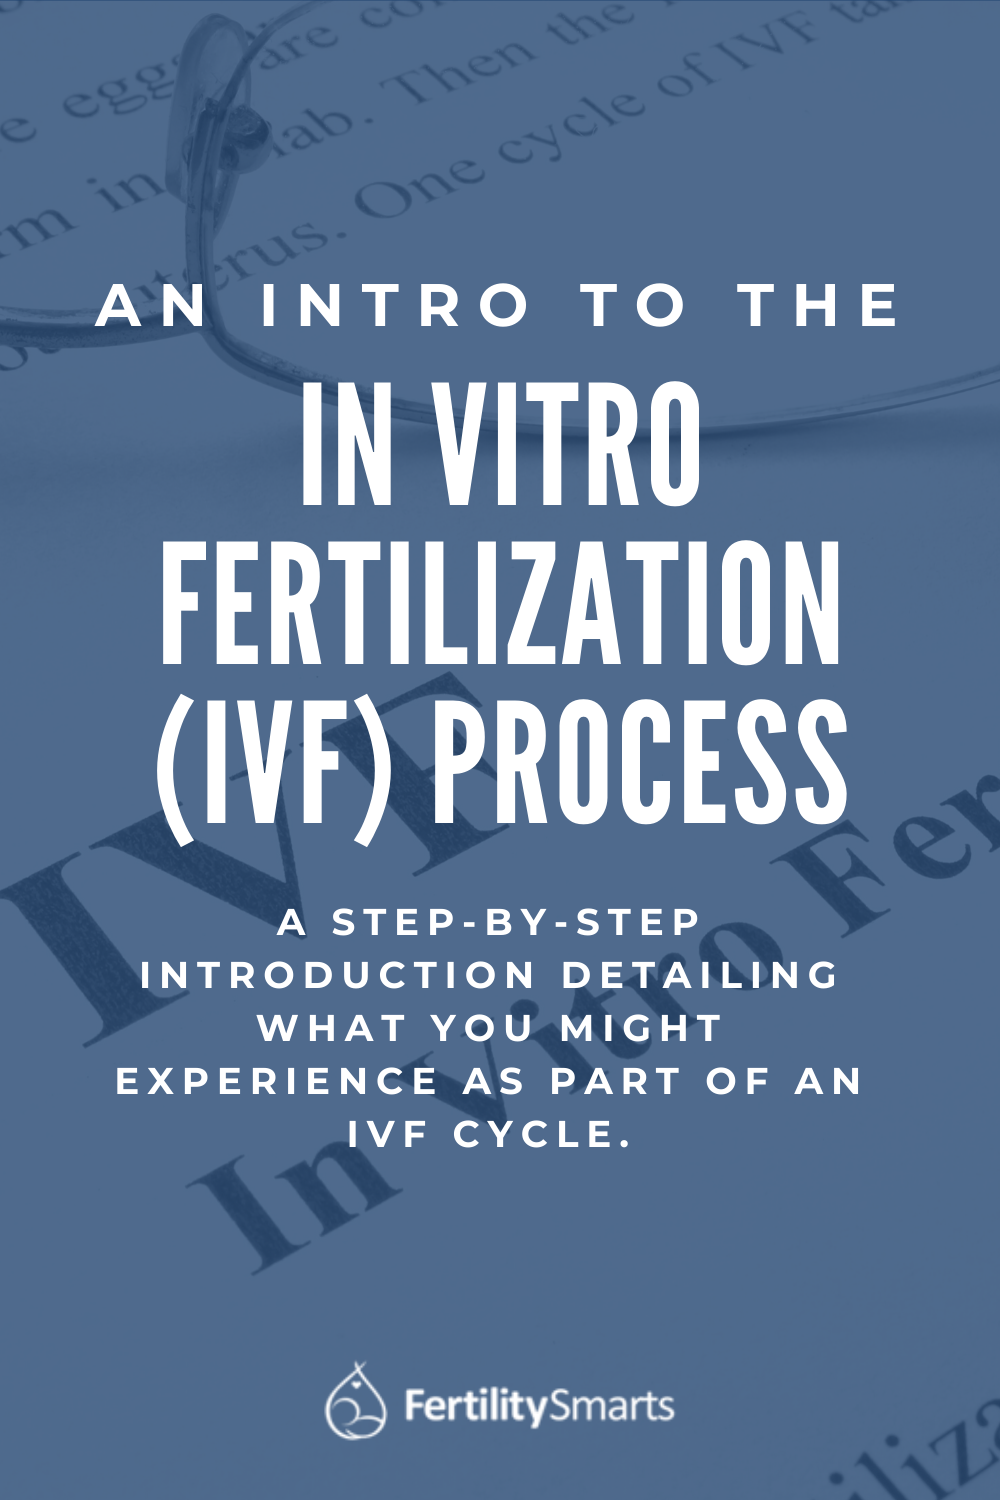 Pinterest Pin Title: An Intro to the IVF Process